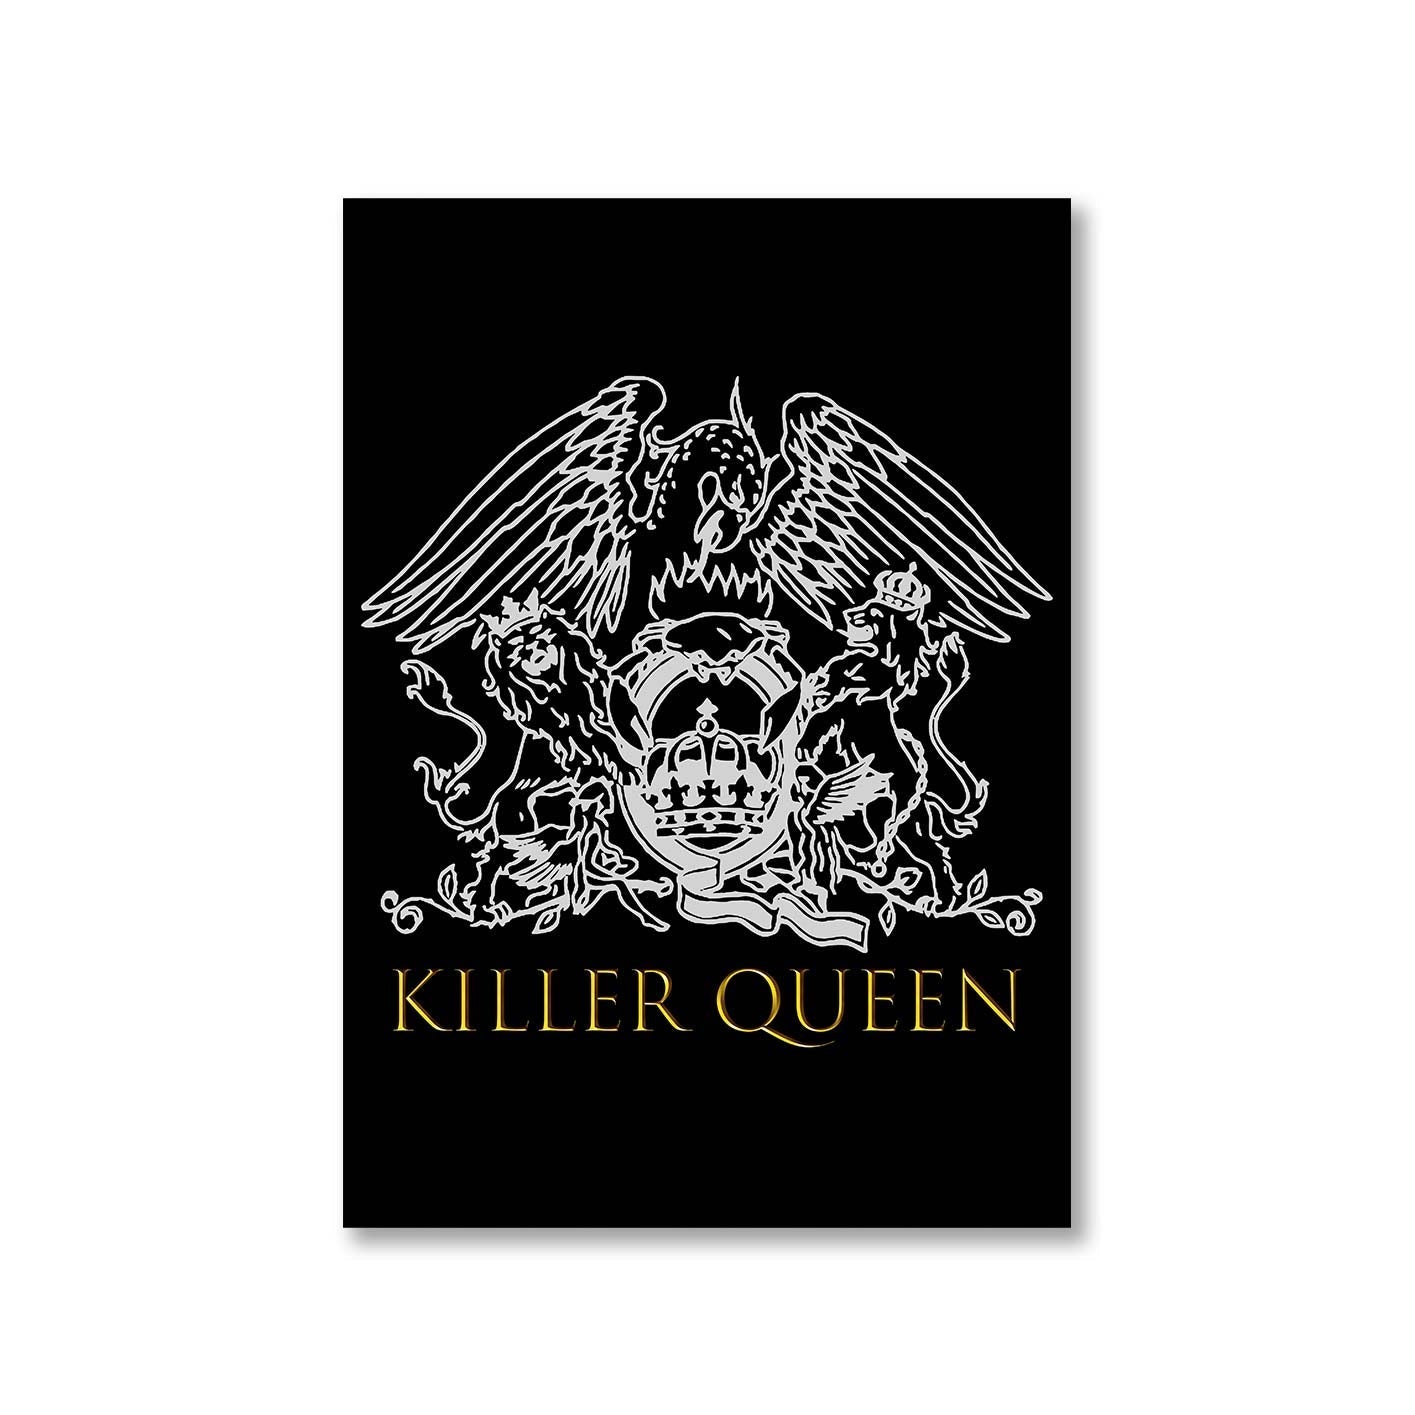 queen killer queen poster wall art buy online united states of america usa the banyan tee tbt a4